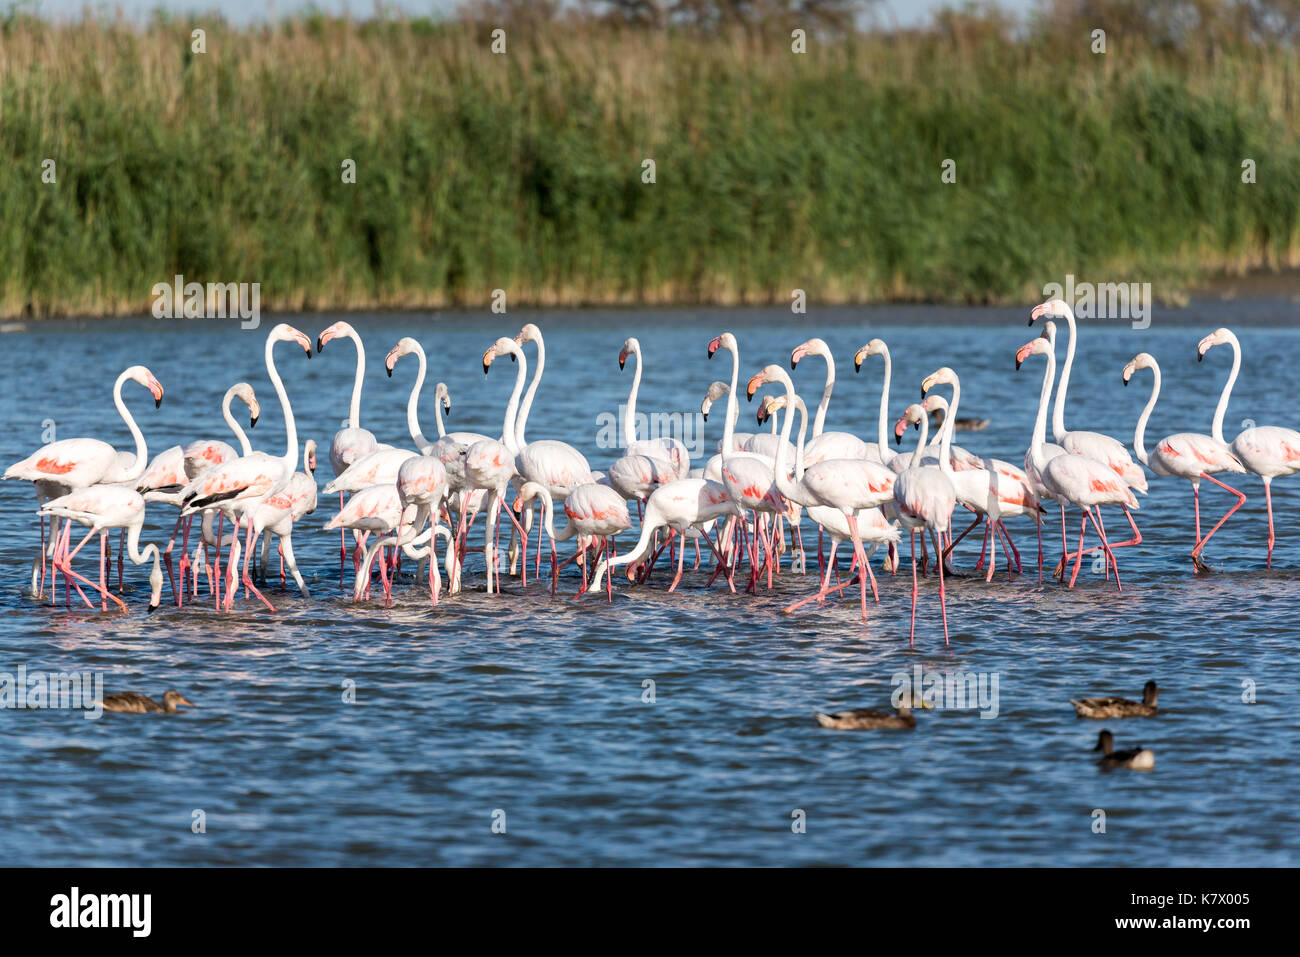 Pink flamingos in the wild. Green mangroves surround a natural pond inhabited by a flock of birds Stock Photo